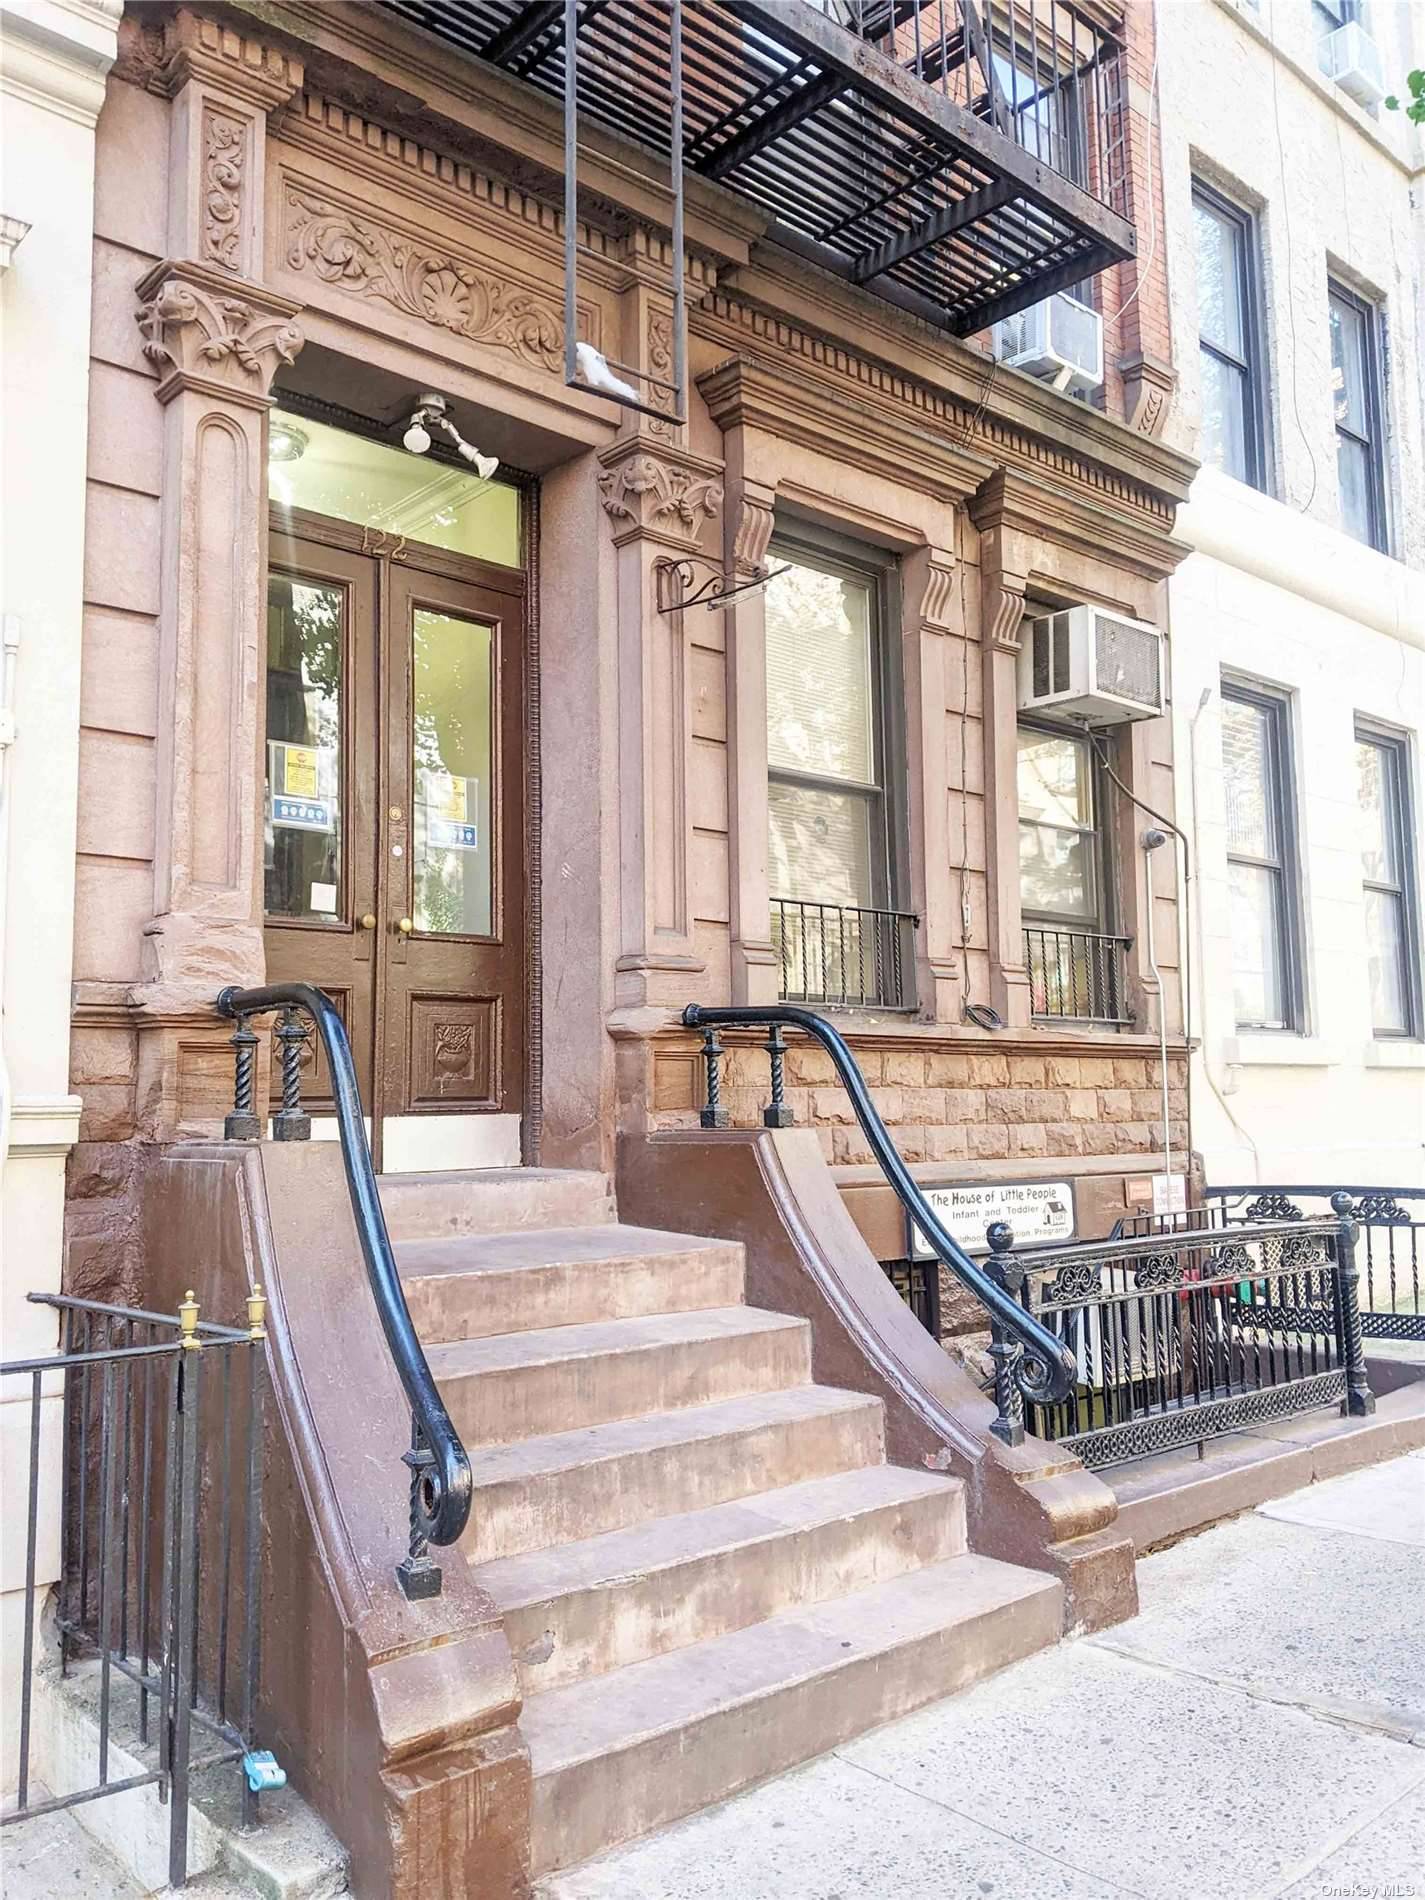 Charming Brownstone 5 story walk up building on 91st street offering the essence of Carnegie Hill.